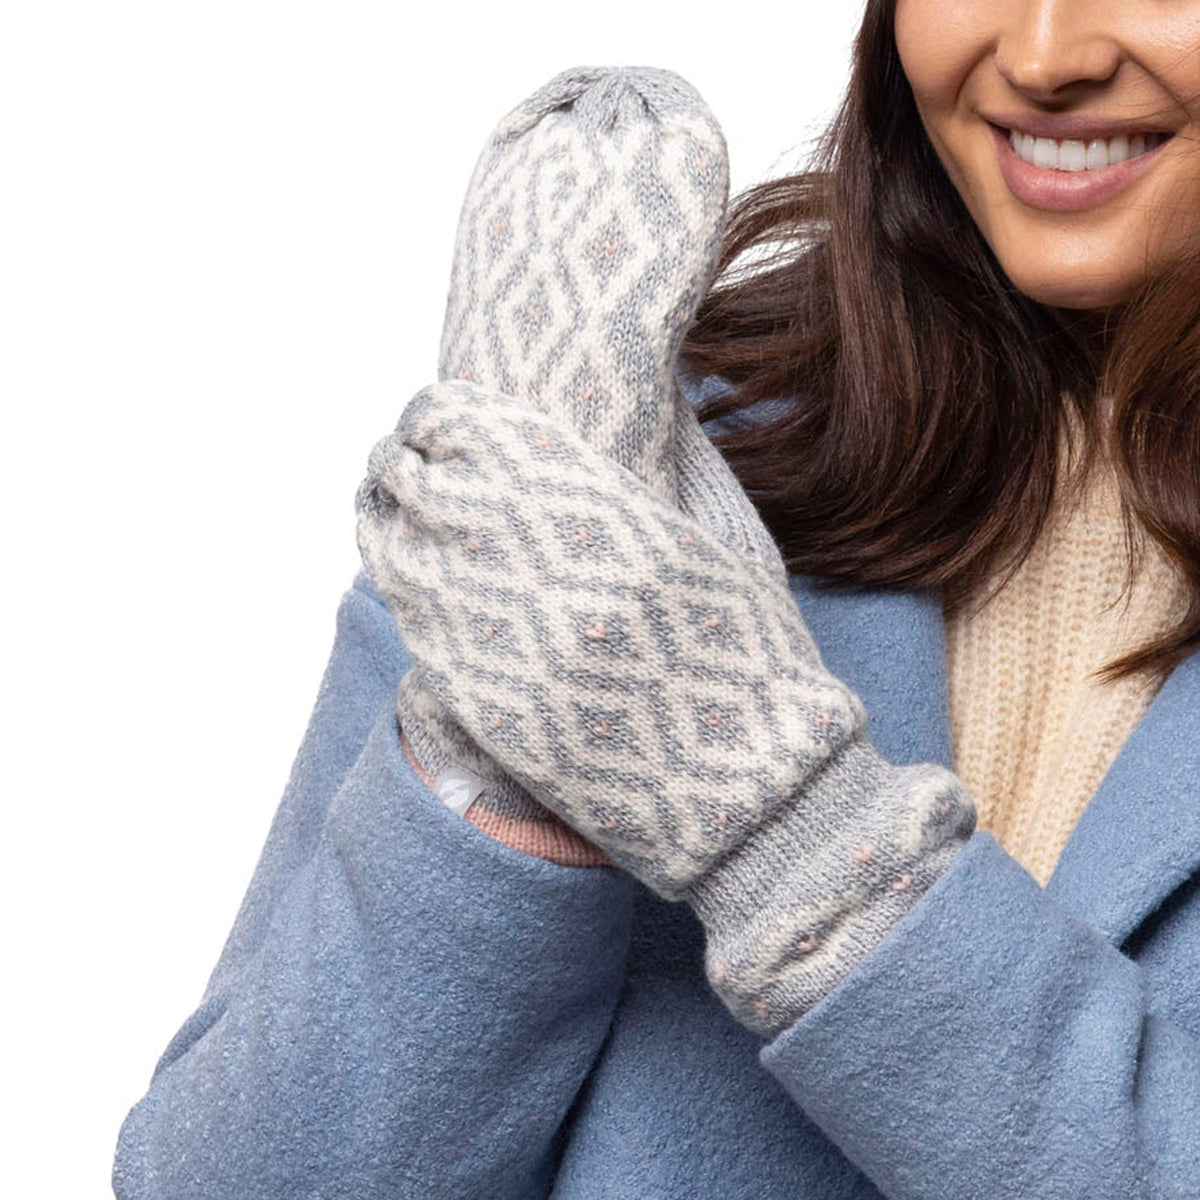 Premium Photo  Woman mittens dressed fashionable gray stands with